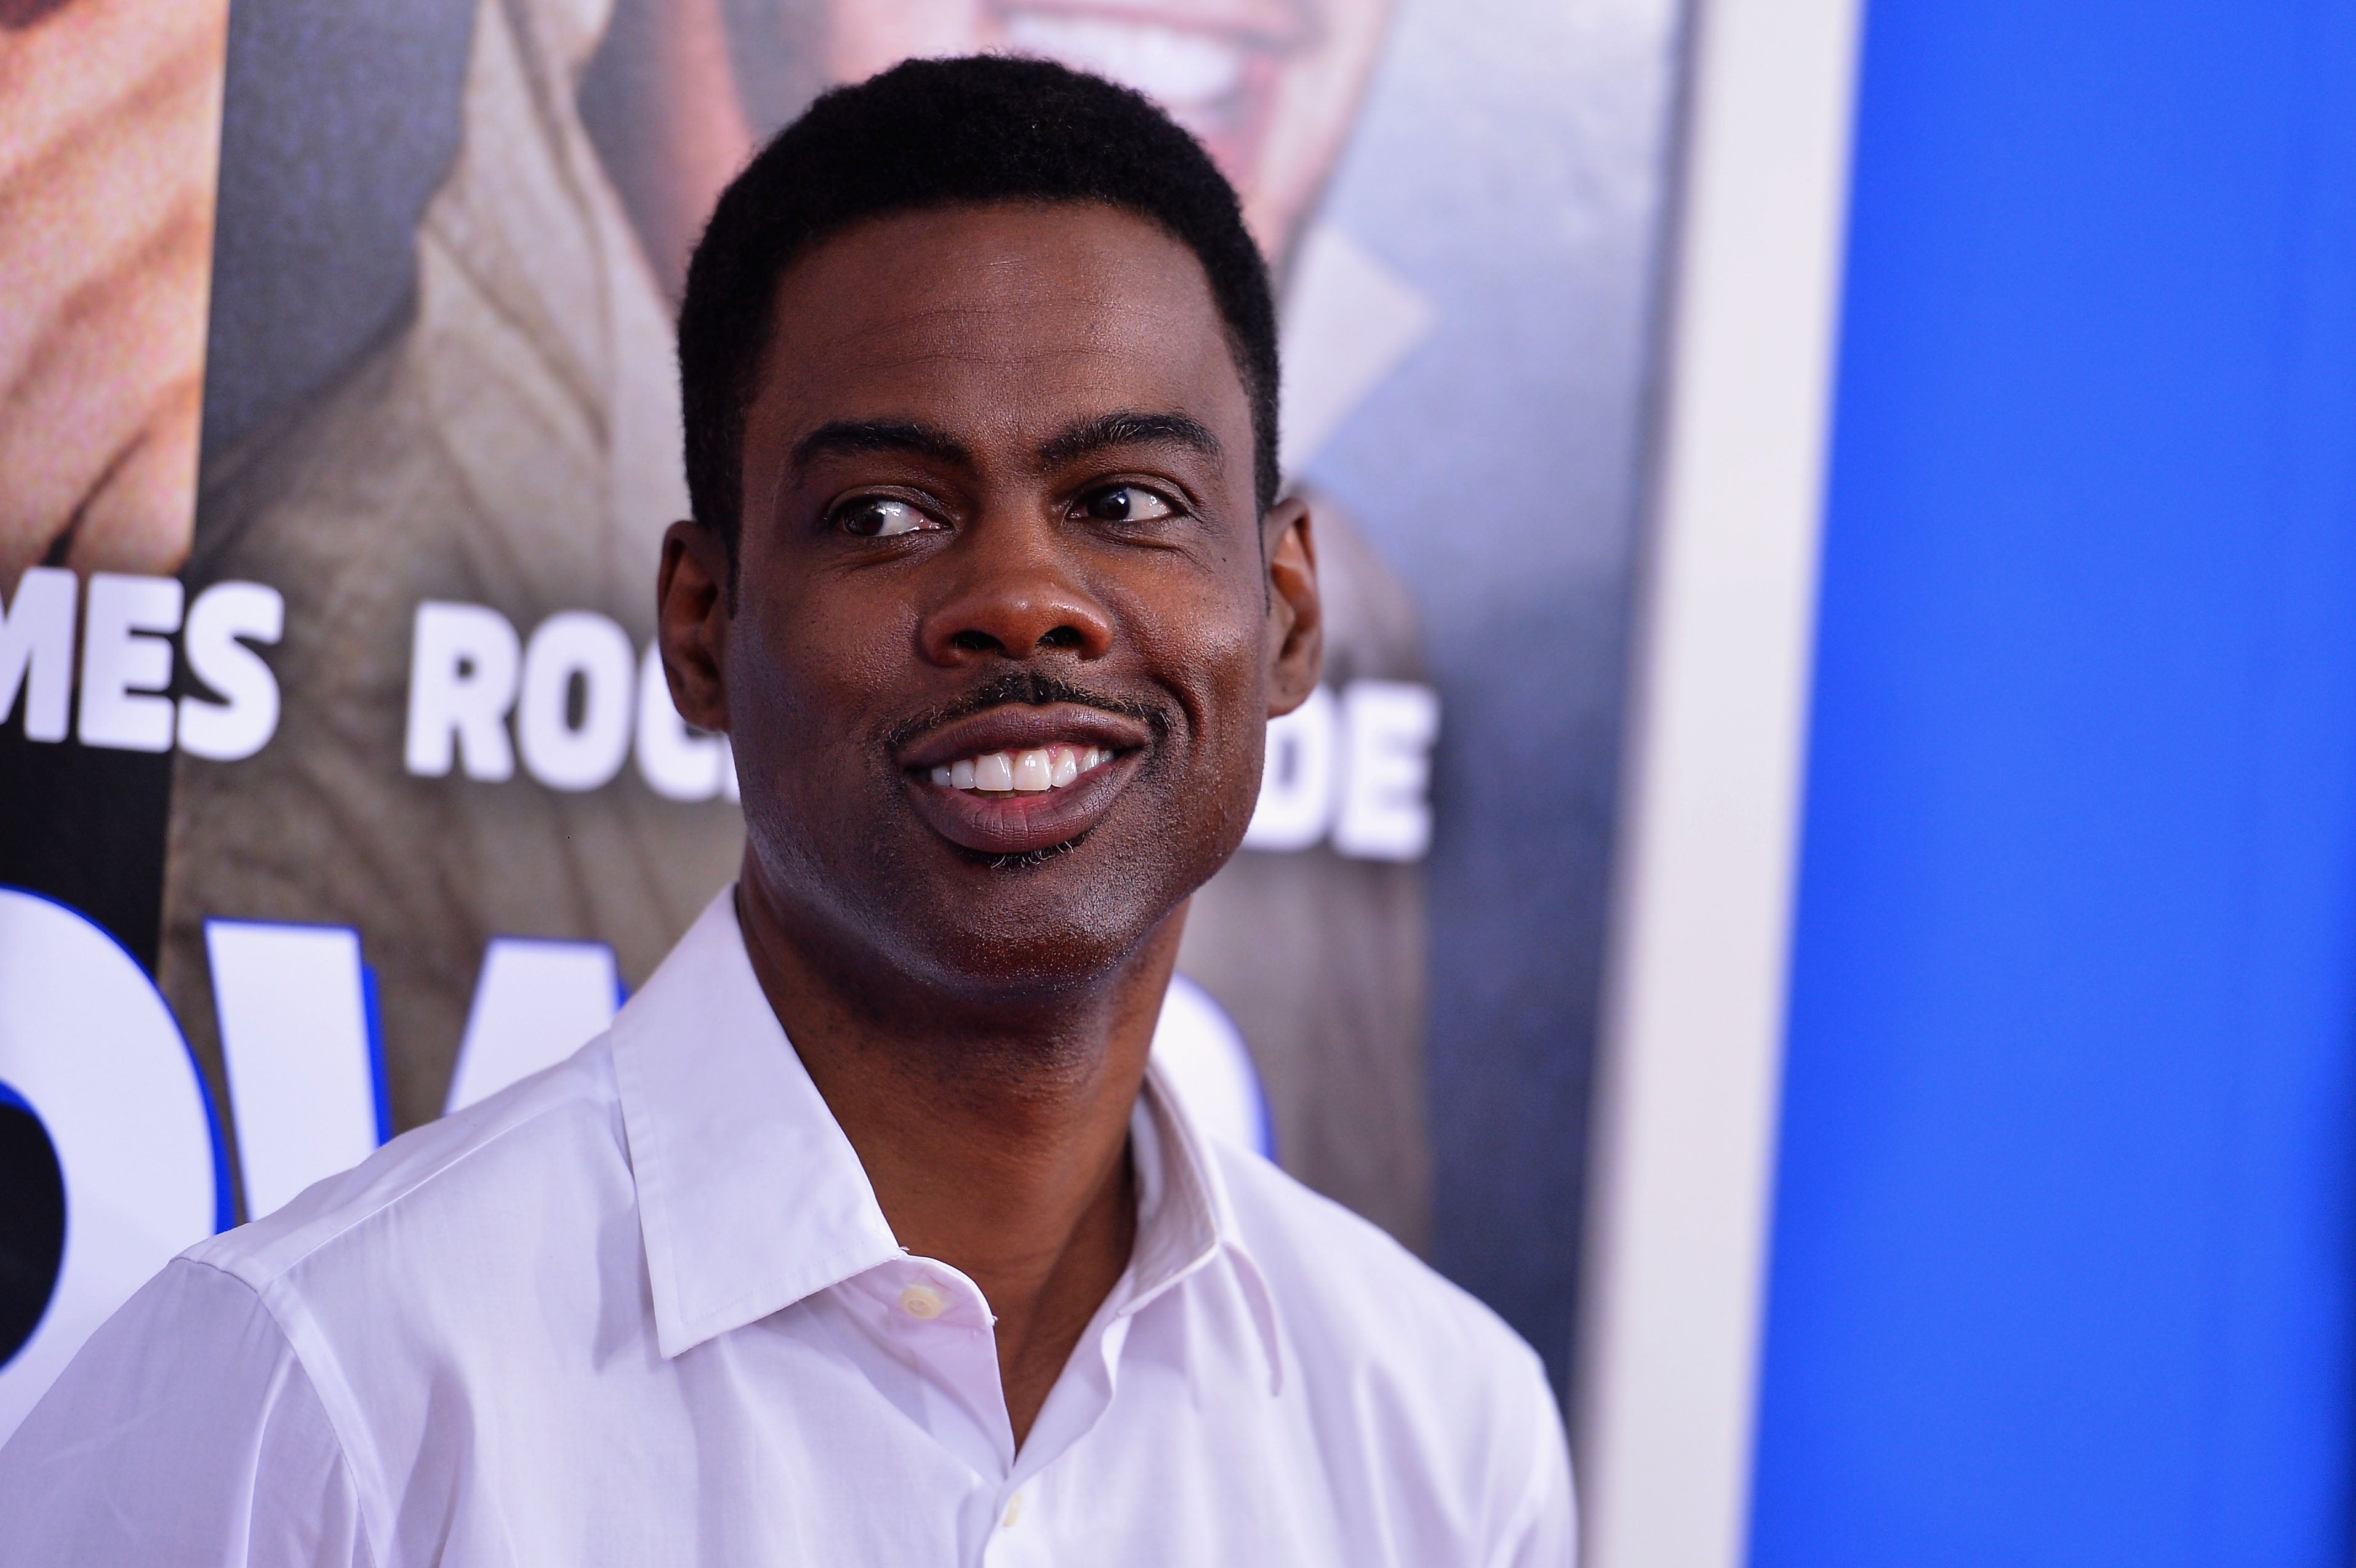 Chris Rock reveals he has tested positive for Covid